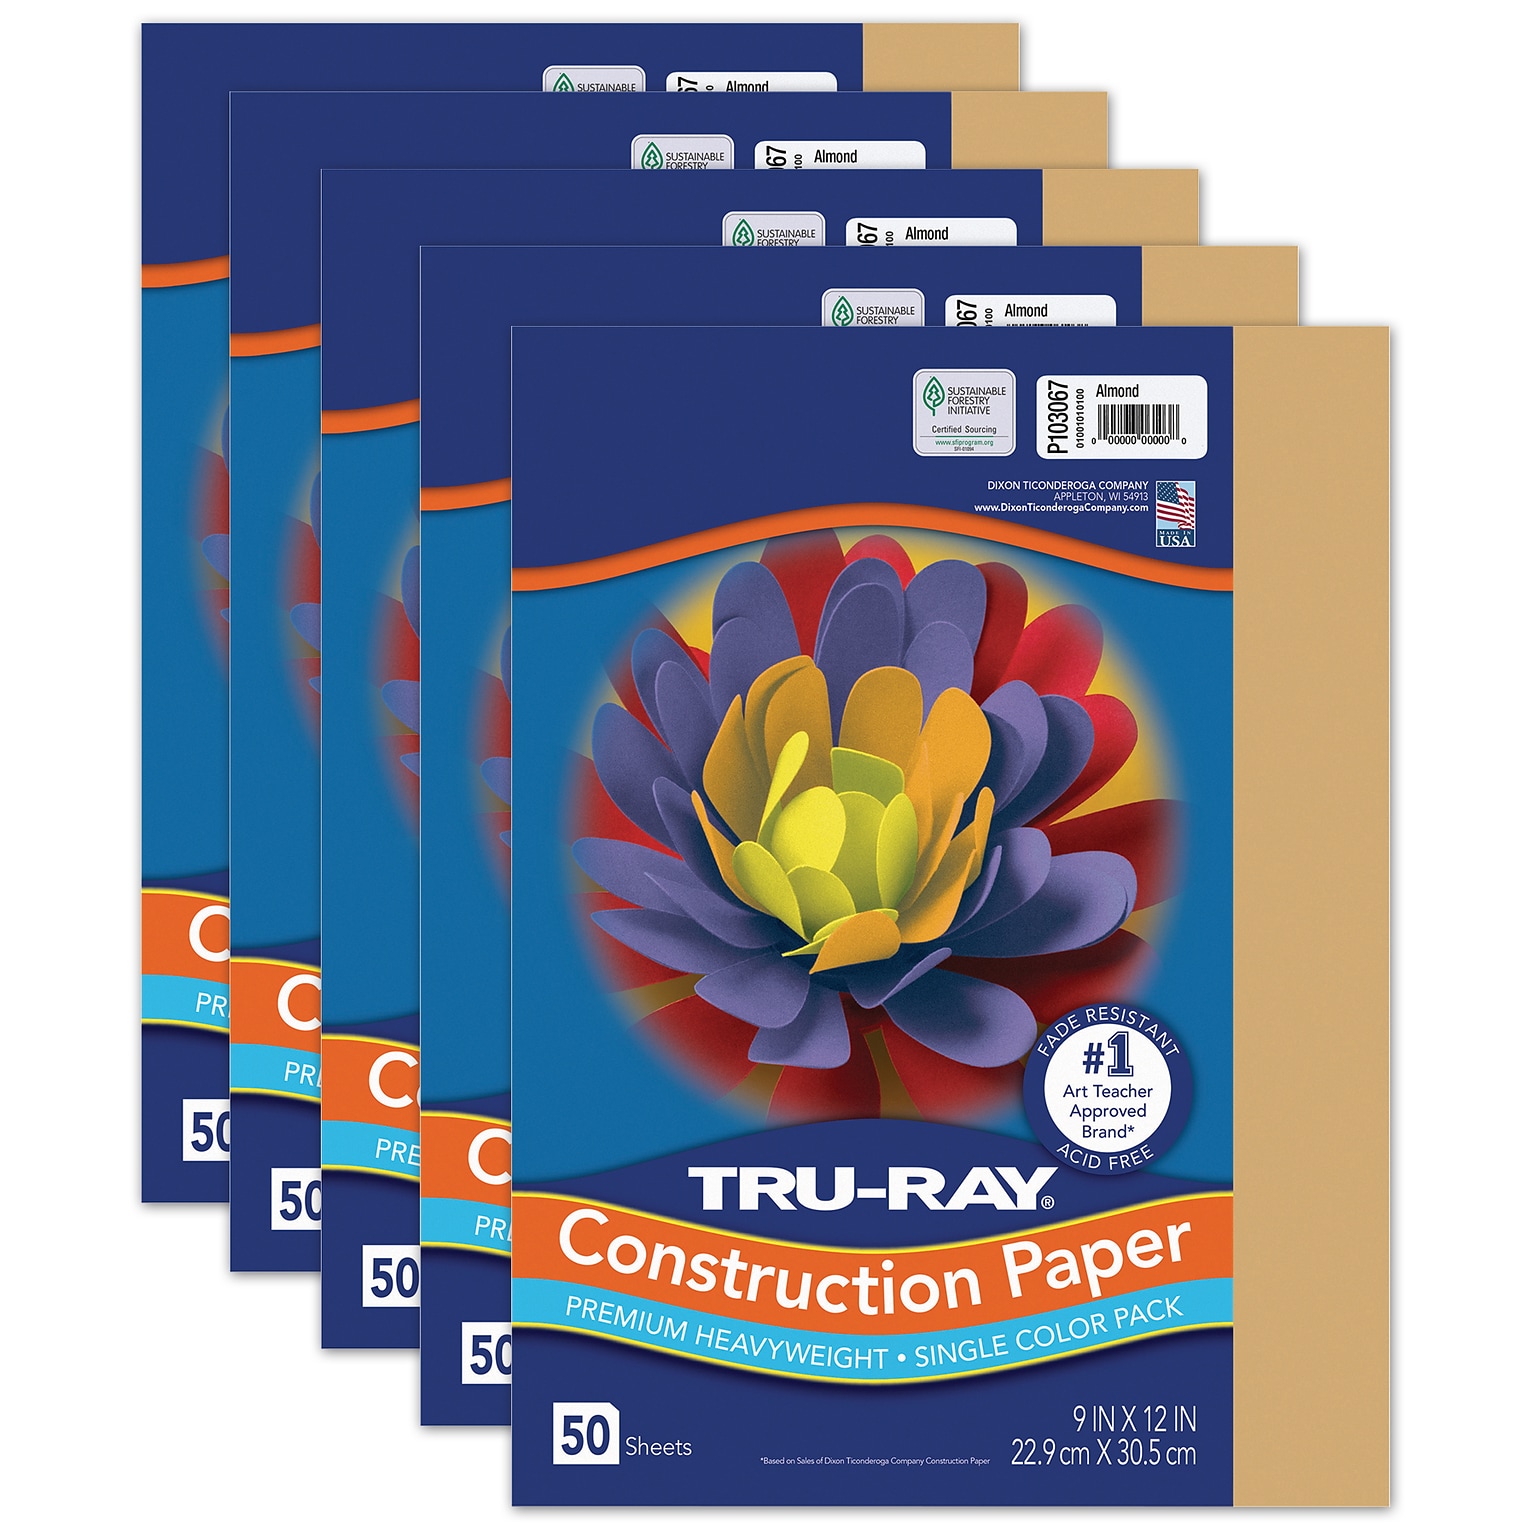 Tru-Ray Fade-Resistant, 9 x 12 Construction Paper, Almond, 50 Sheets Per Pack, 5 Packs (PAC103067-5)